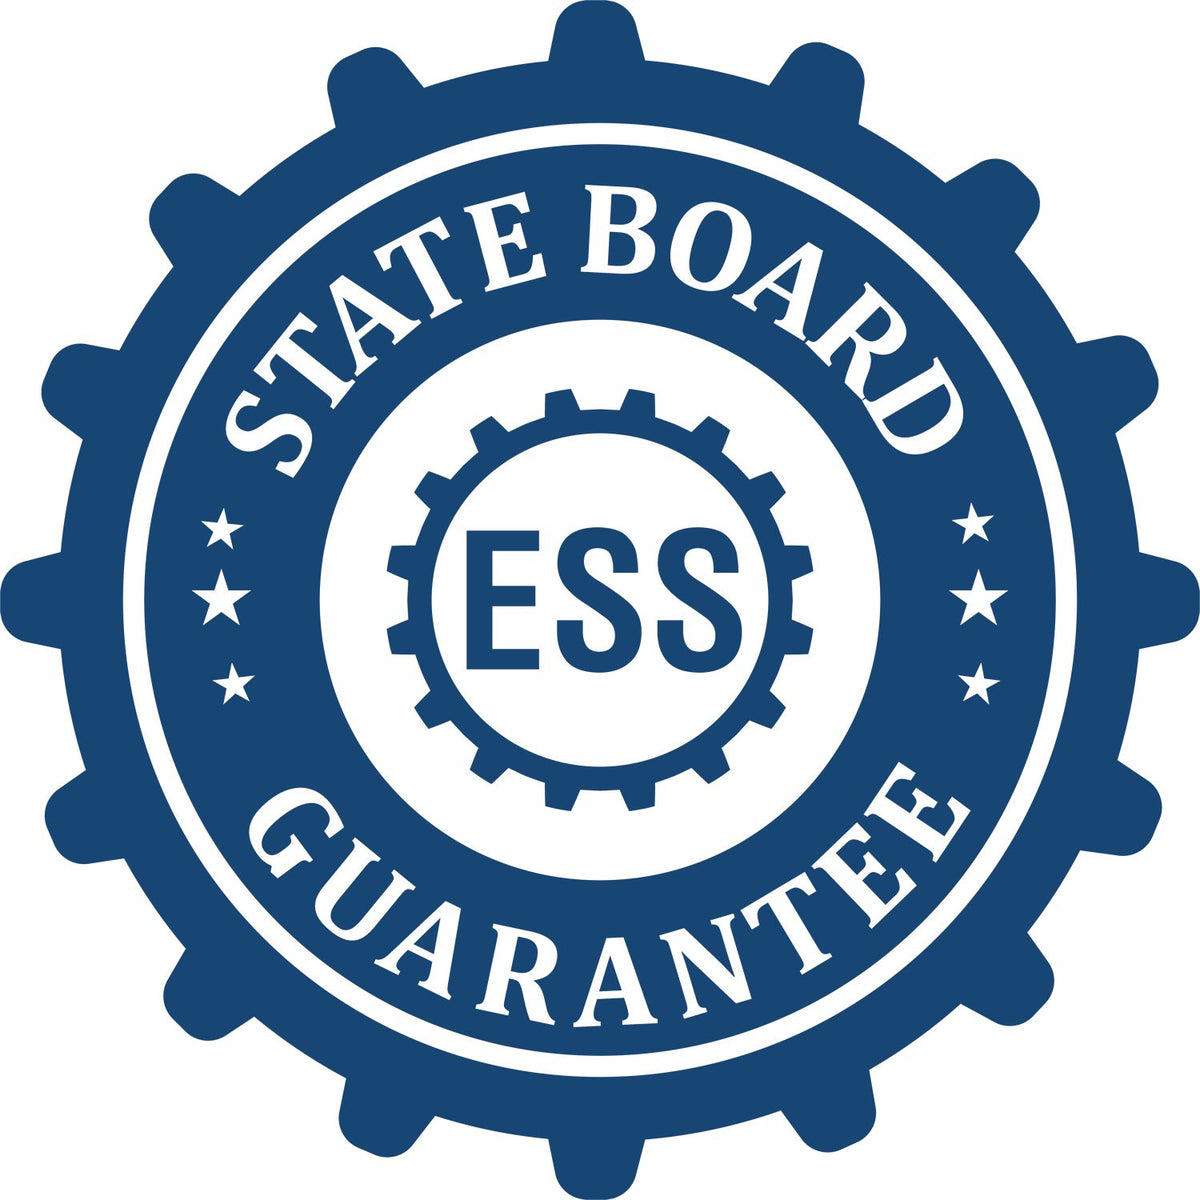 An emblem in a gear shape illustrating a state board guarantee for the Premium MaxLight Pre-Inked South Carolina Engineering Stamp product.